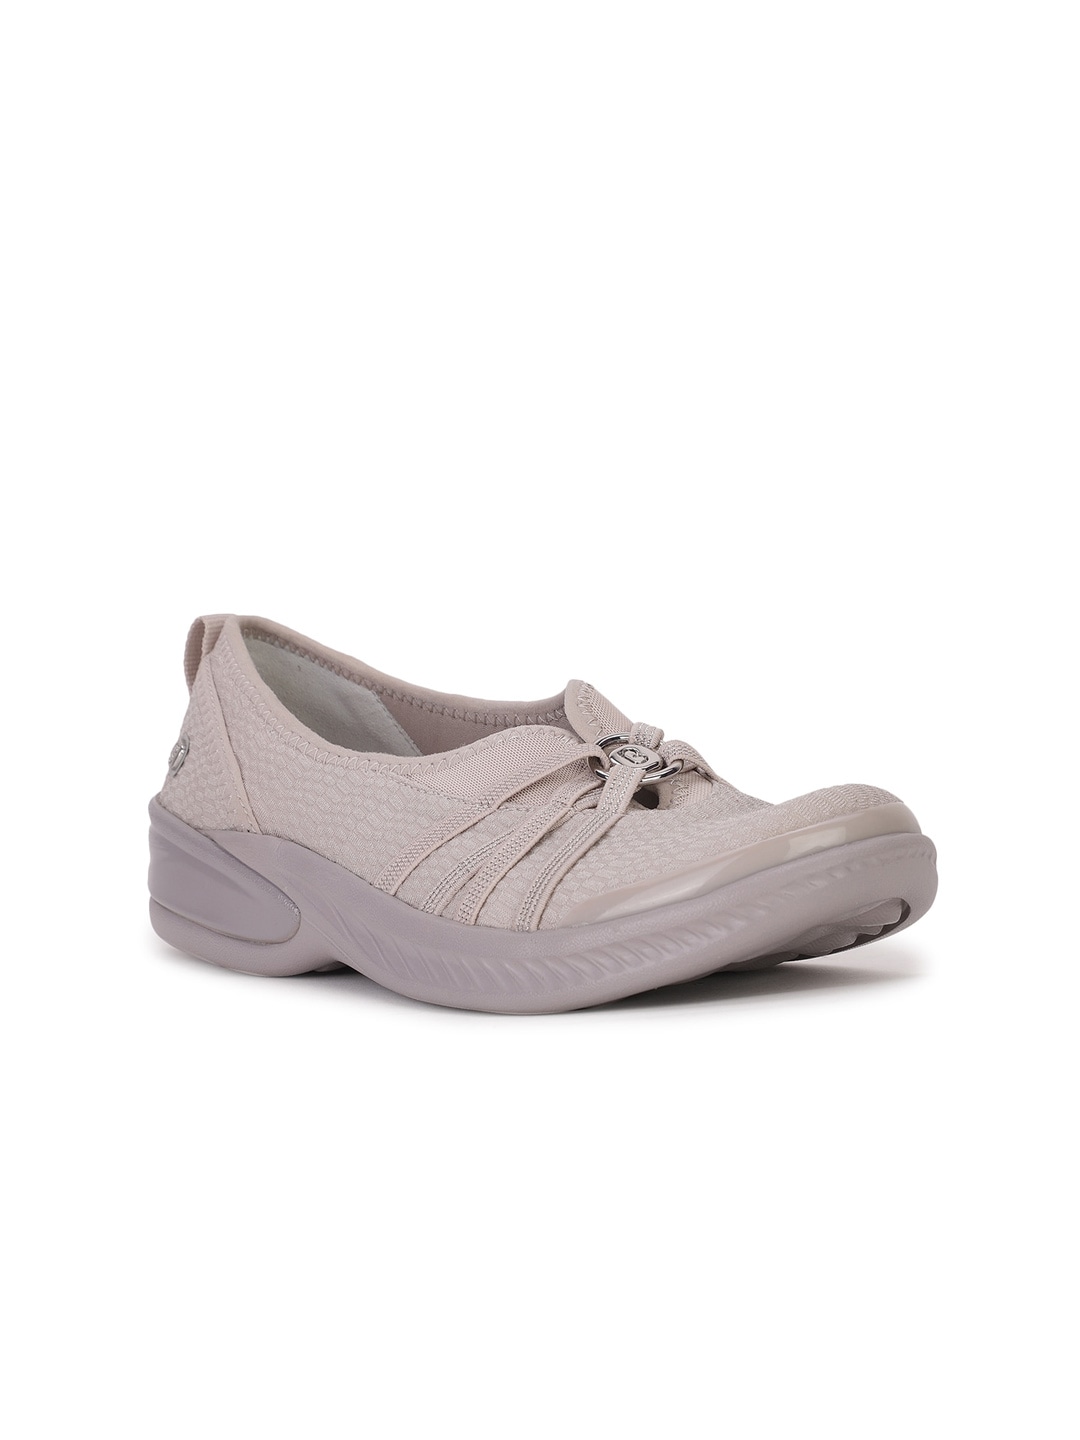 Naturalizer Women Grey Textured PU Slip-On Sneakers Price in India